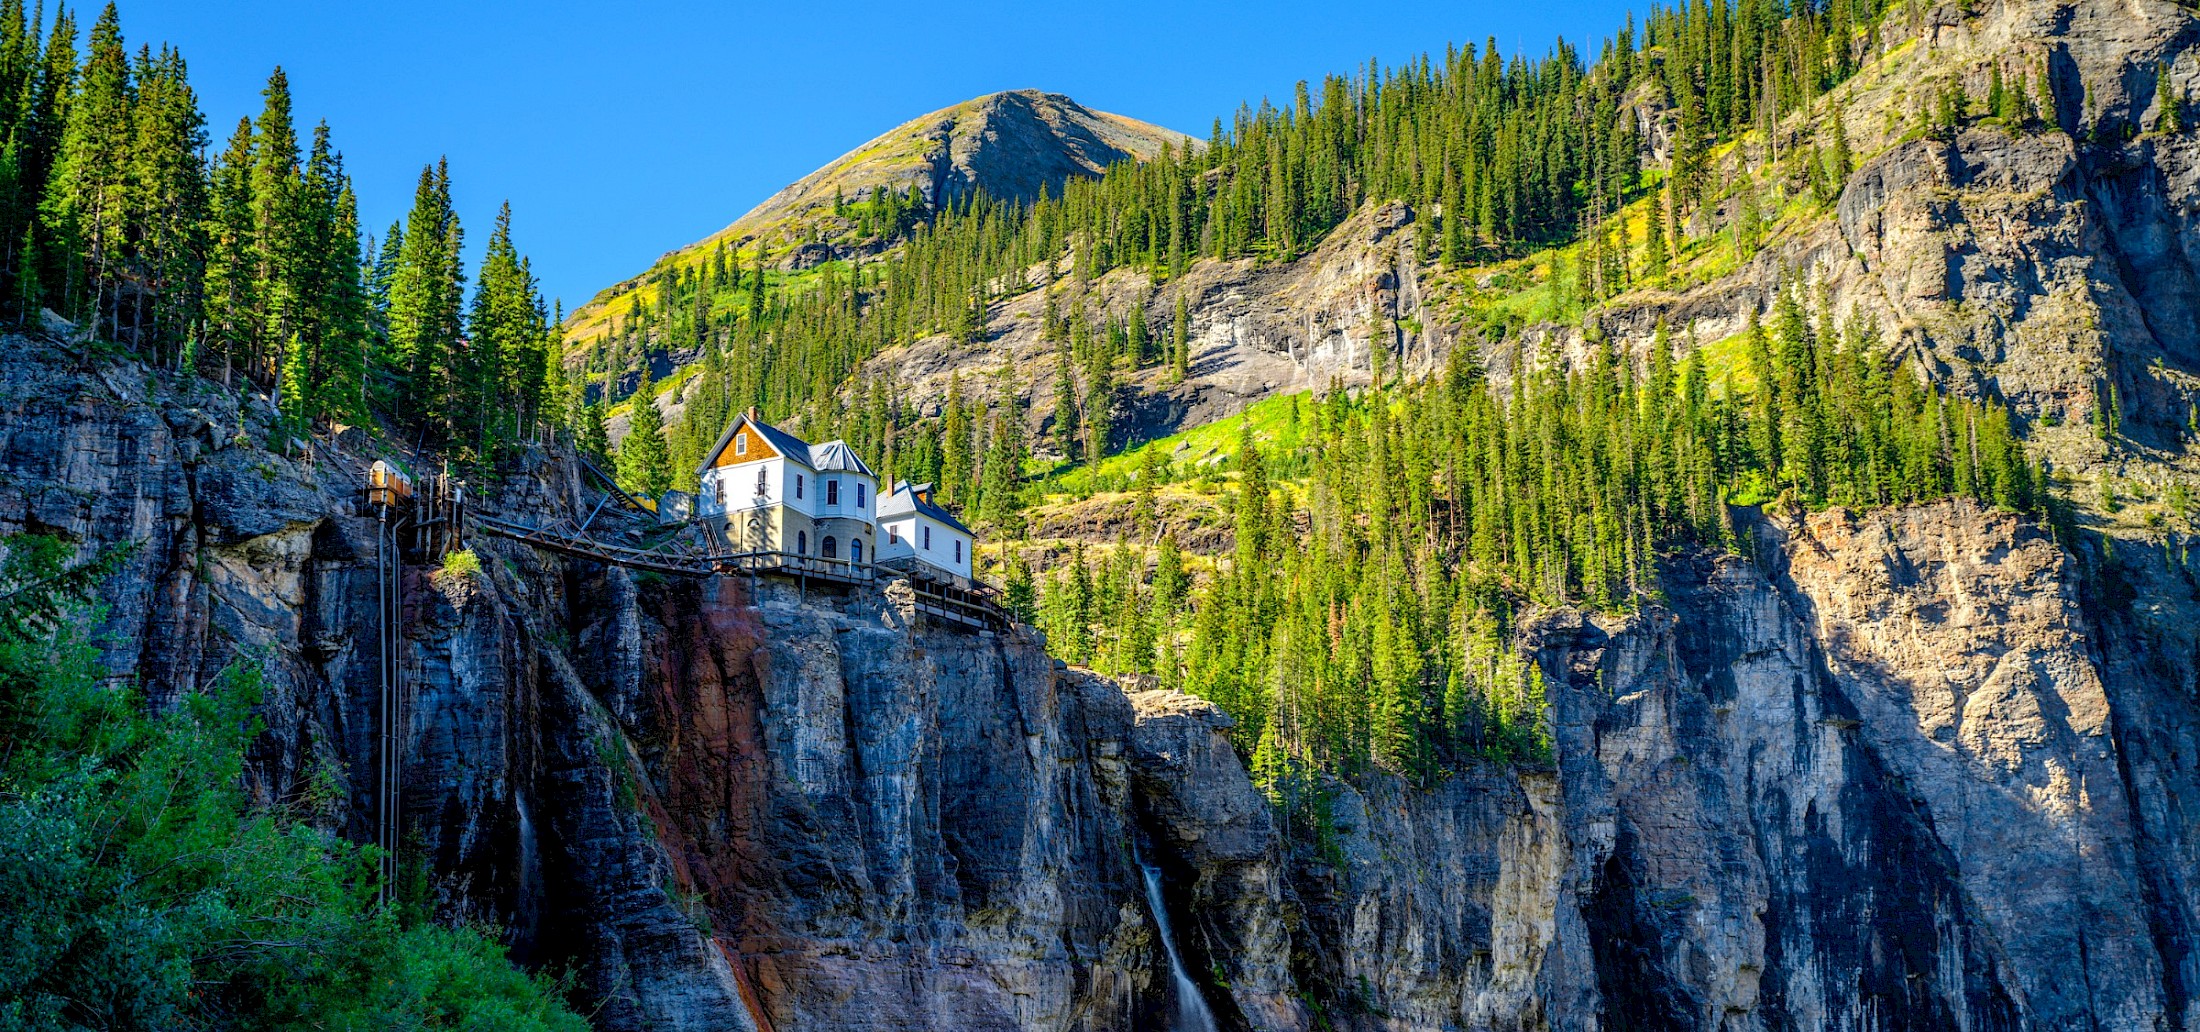 Summer Lodging From $219